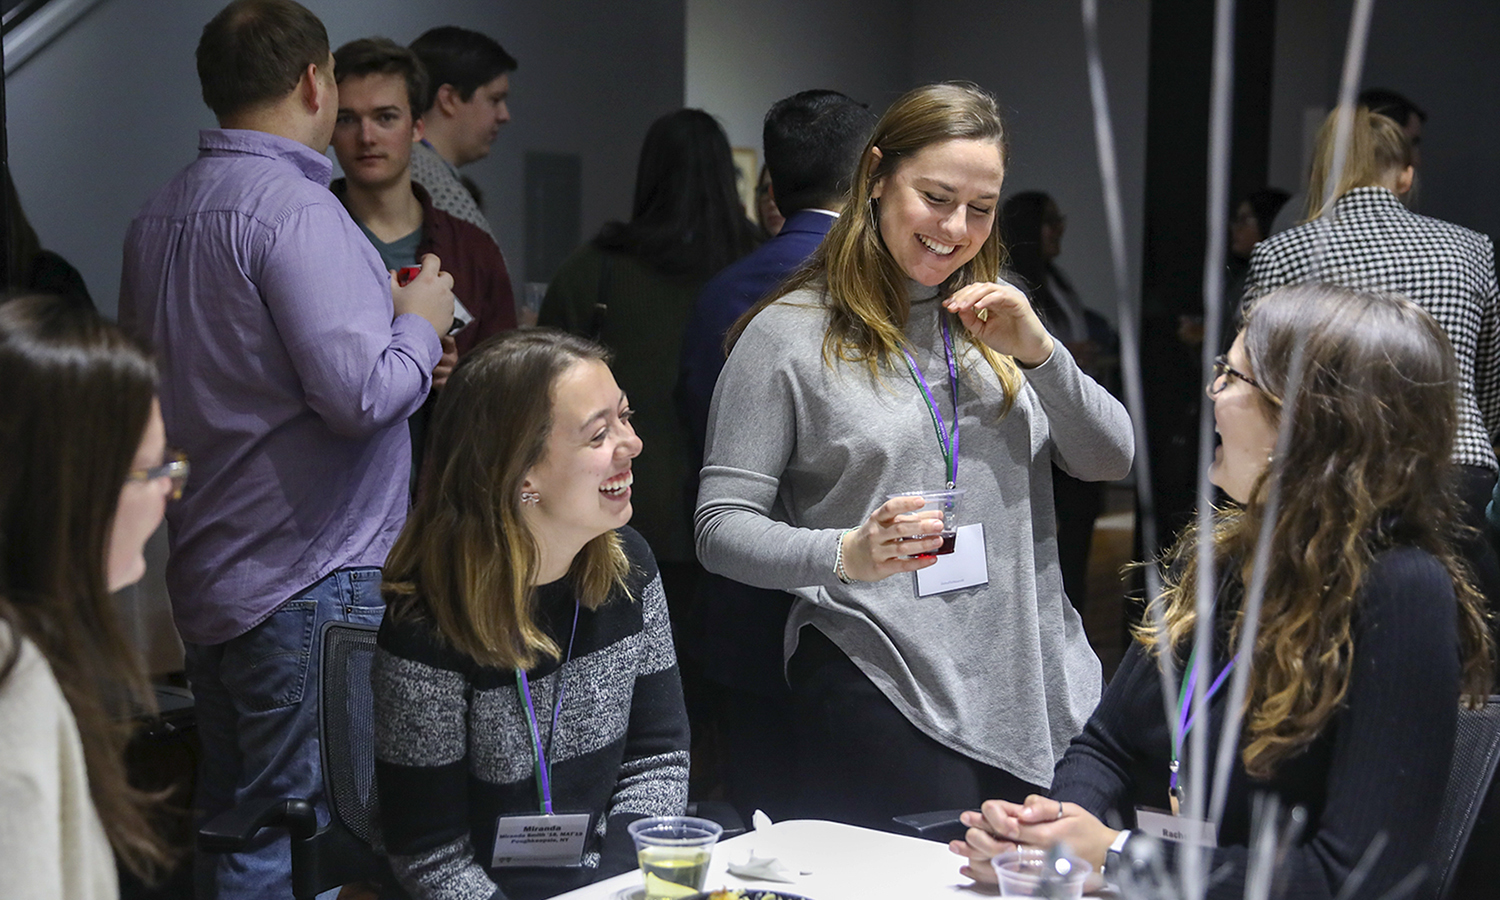 Miranda Smith â19, Assistant Director of Admissions Christine Moloney '17 and Rachel Evans â19 share a laugh during the Young Alum Happy Hour in the Bozzuto Center for Entrepreneruship.